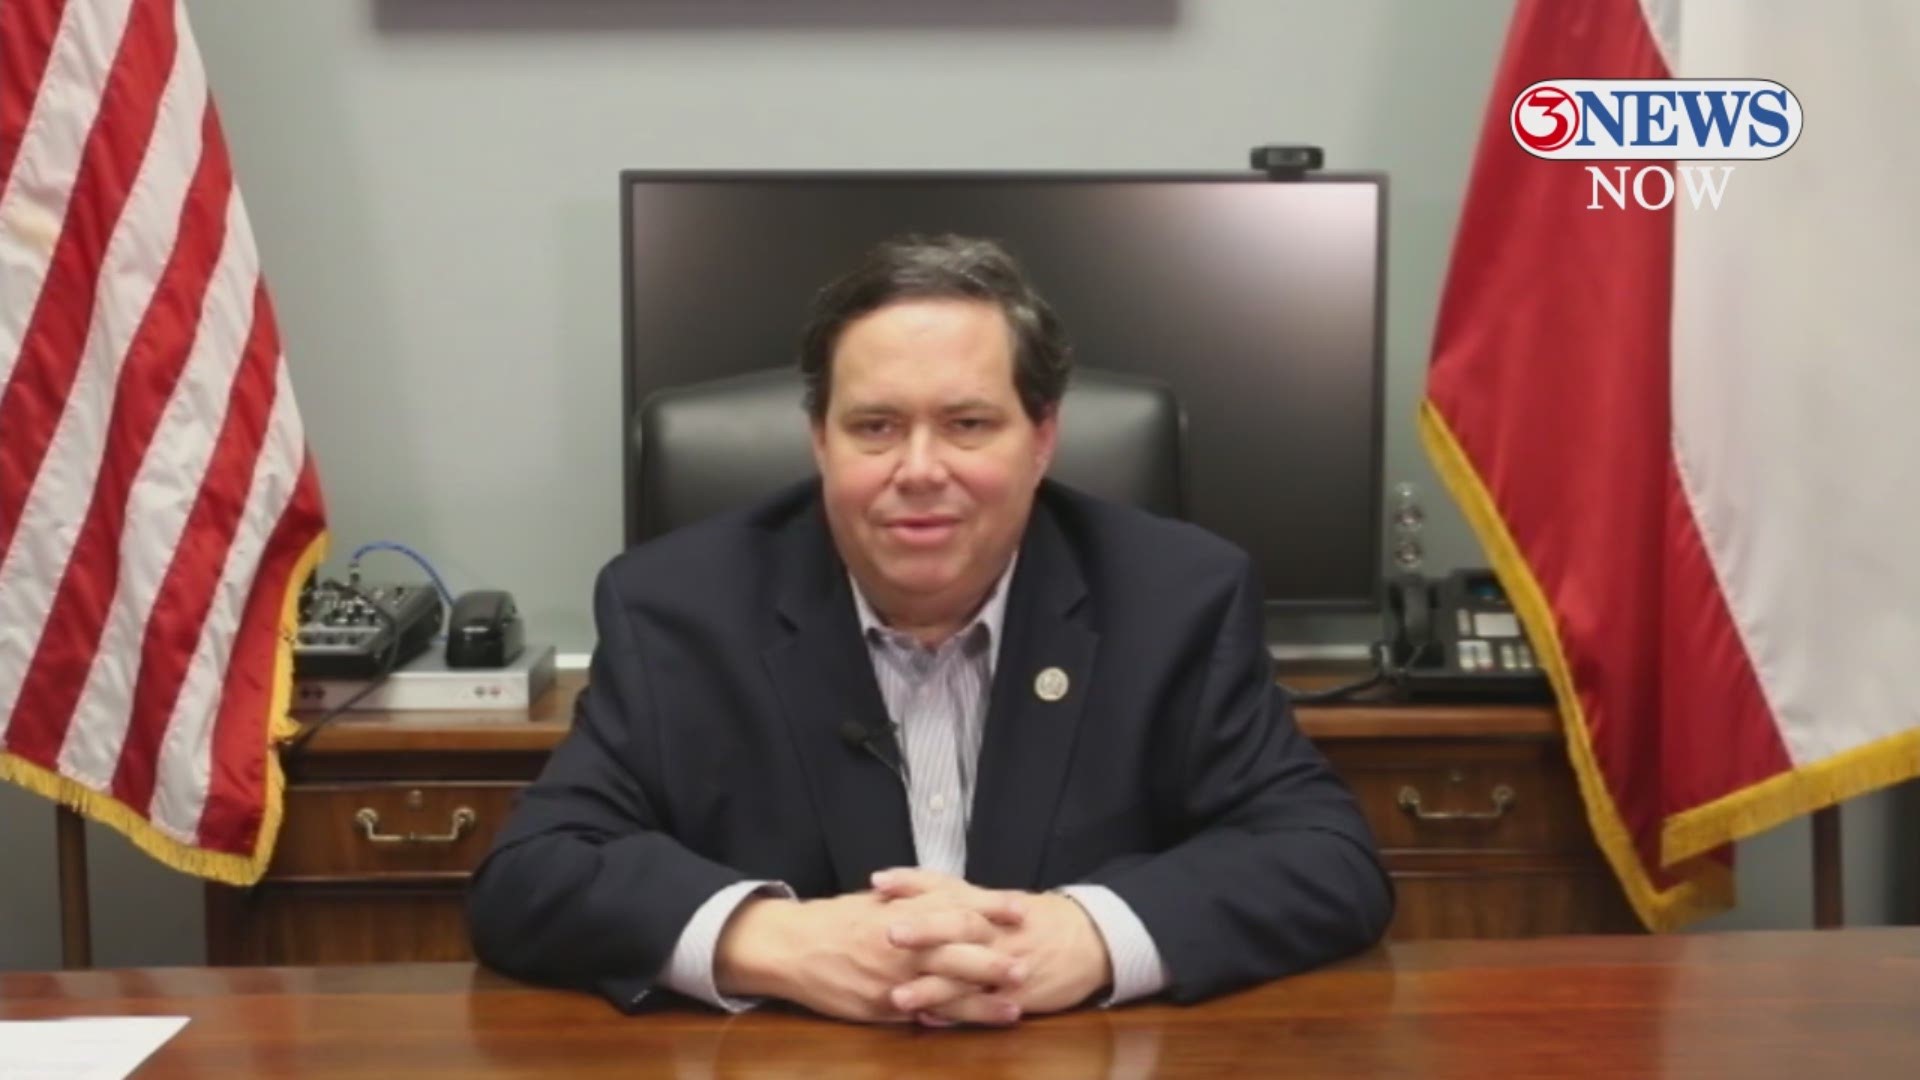 Congressman Blake Farenthold resigned from U.S. Congress Friday, sending a notice to Texas Governor Greg Abbott and a statement to the media.